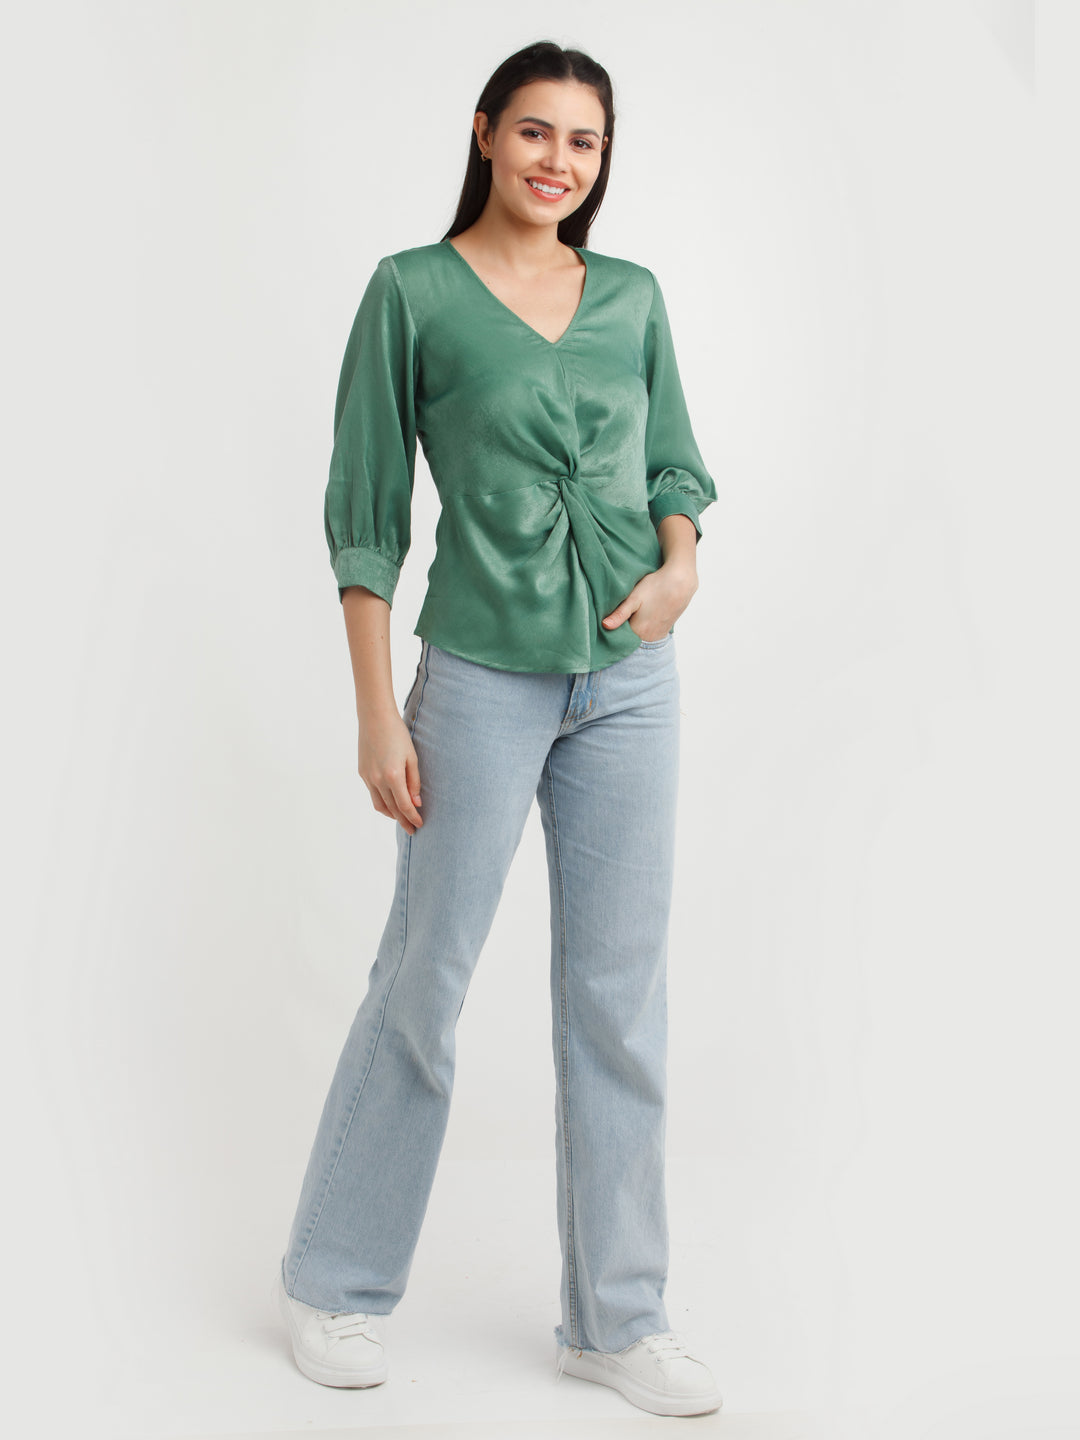 Green Solid Top For Women